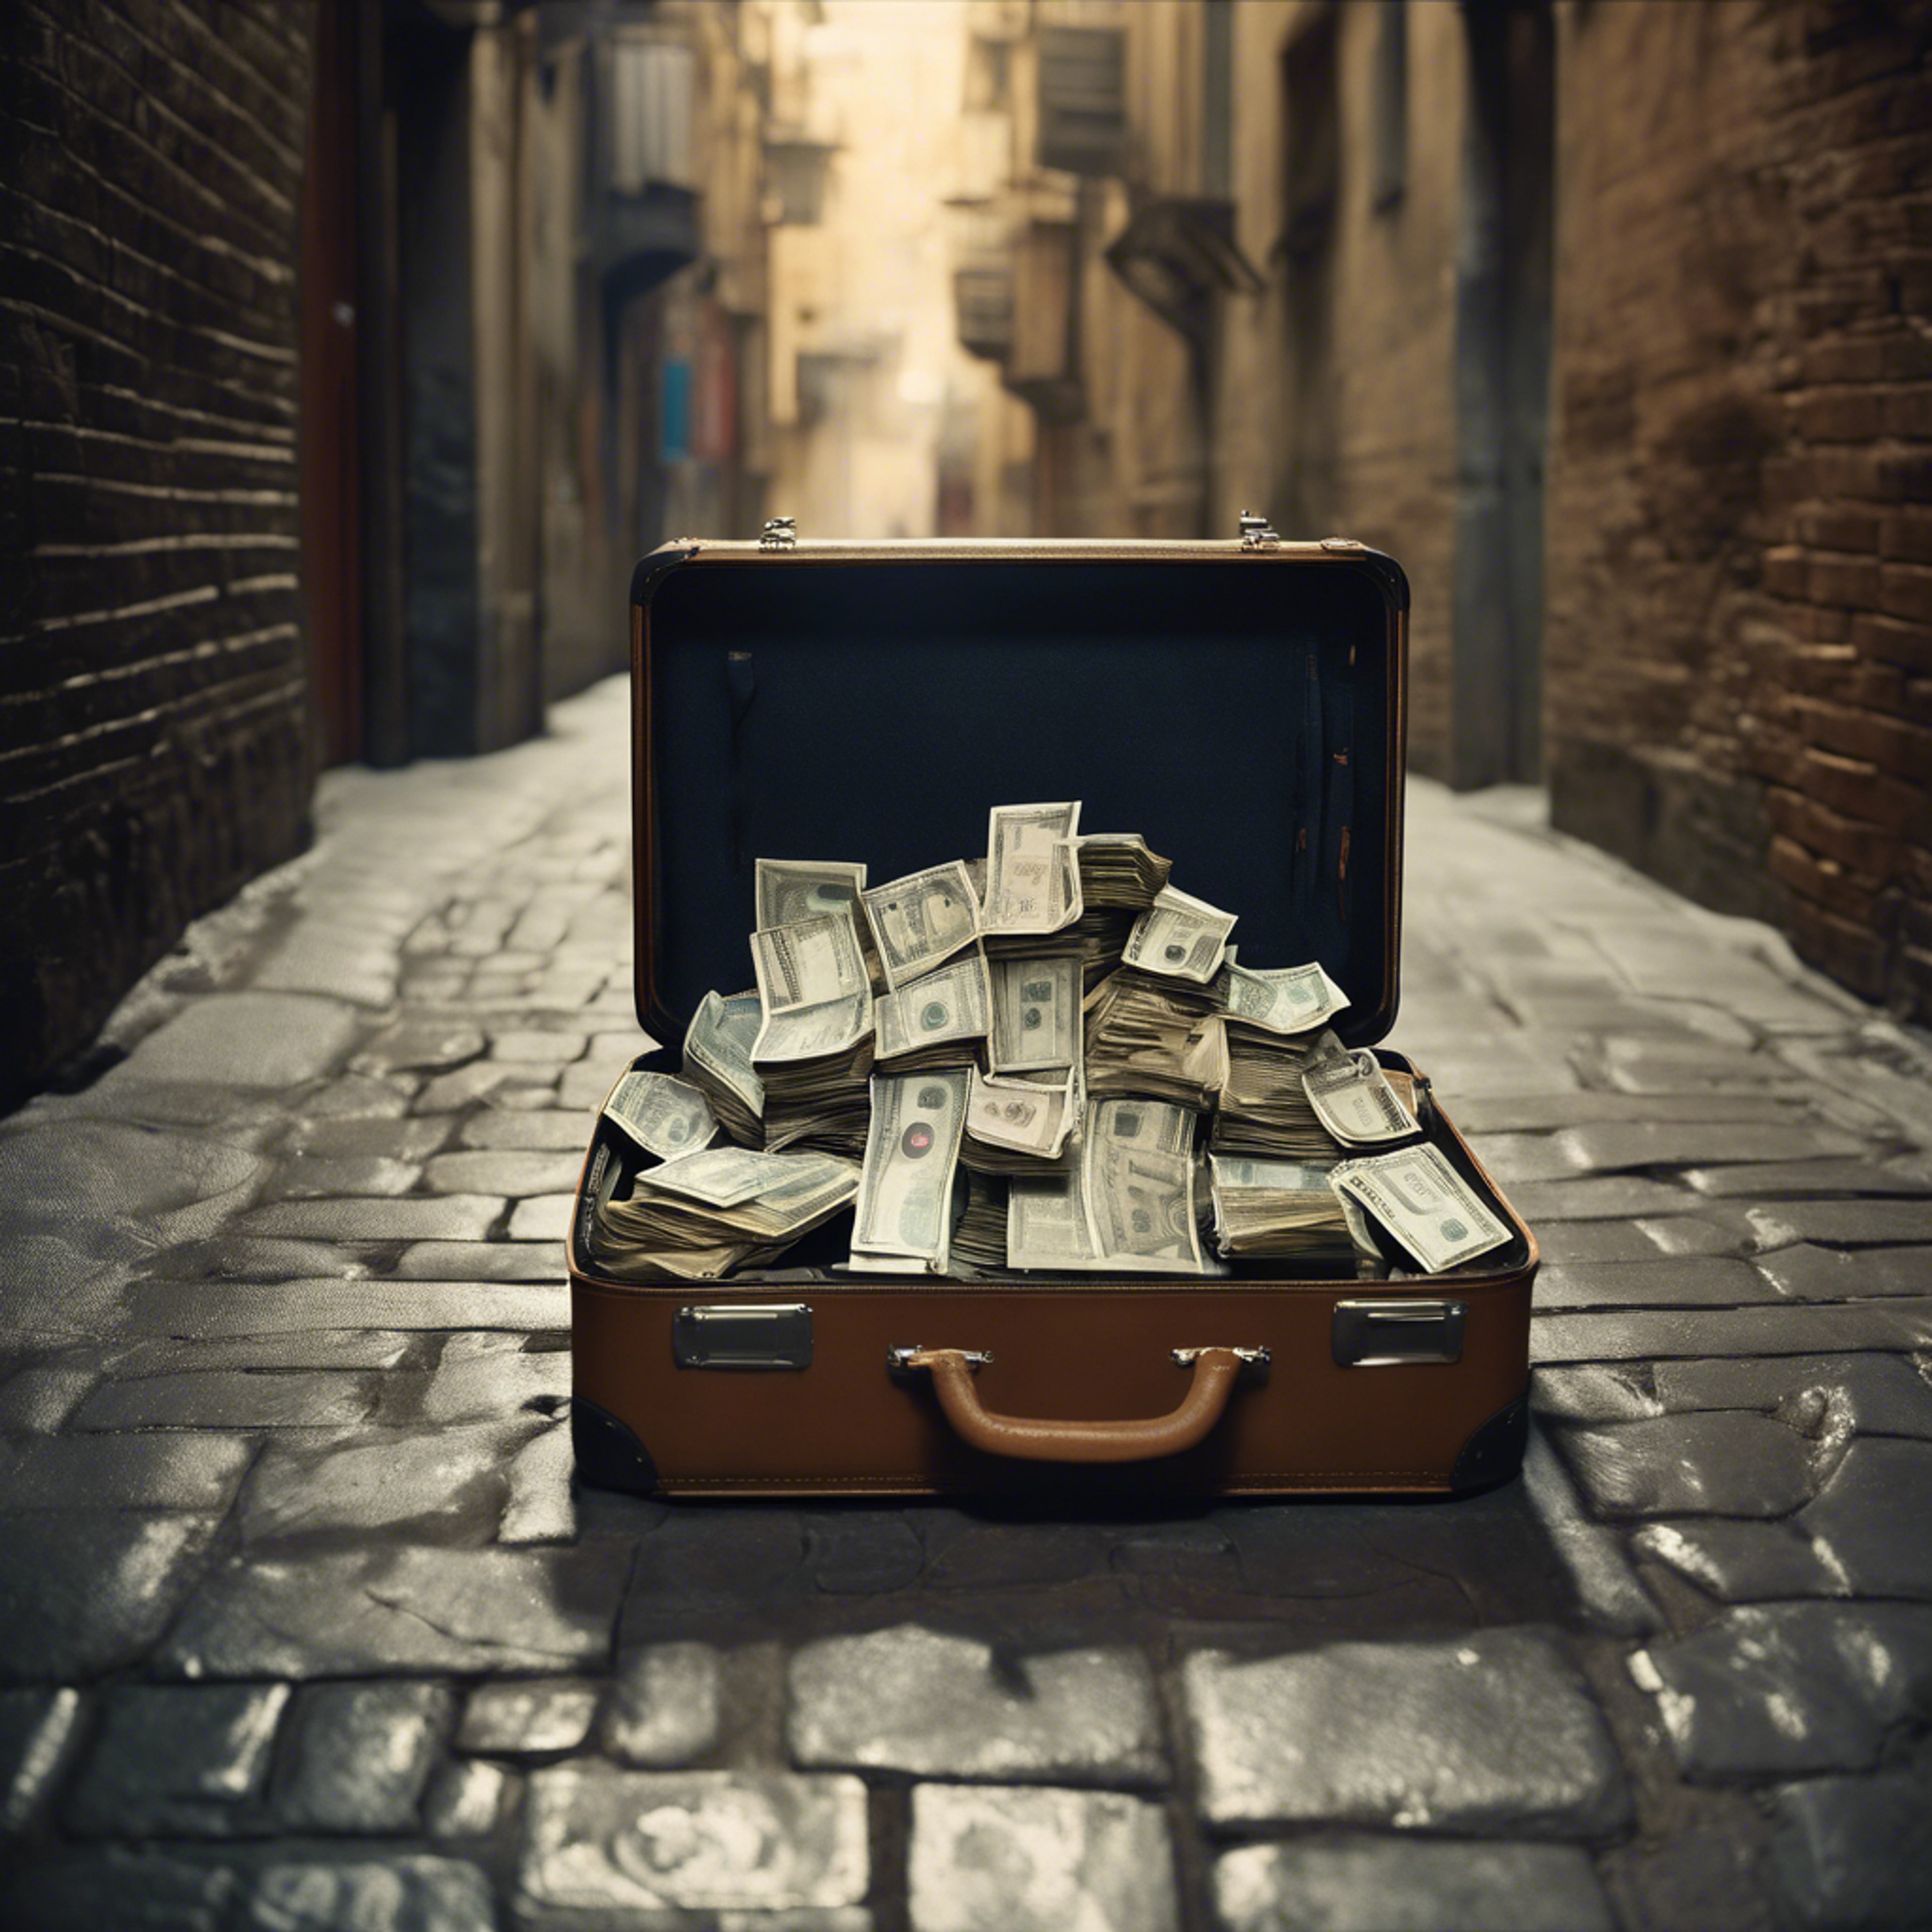 A suitcase filled with mafia money being exchanged in dimly lit alleyway.壁紙[001aead7b2c840f5bbce]